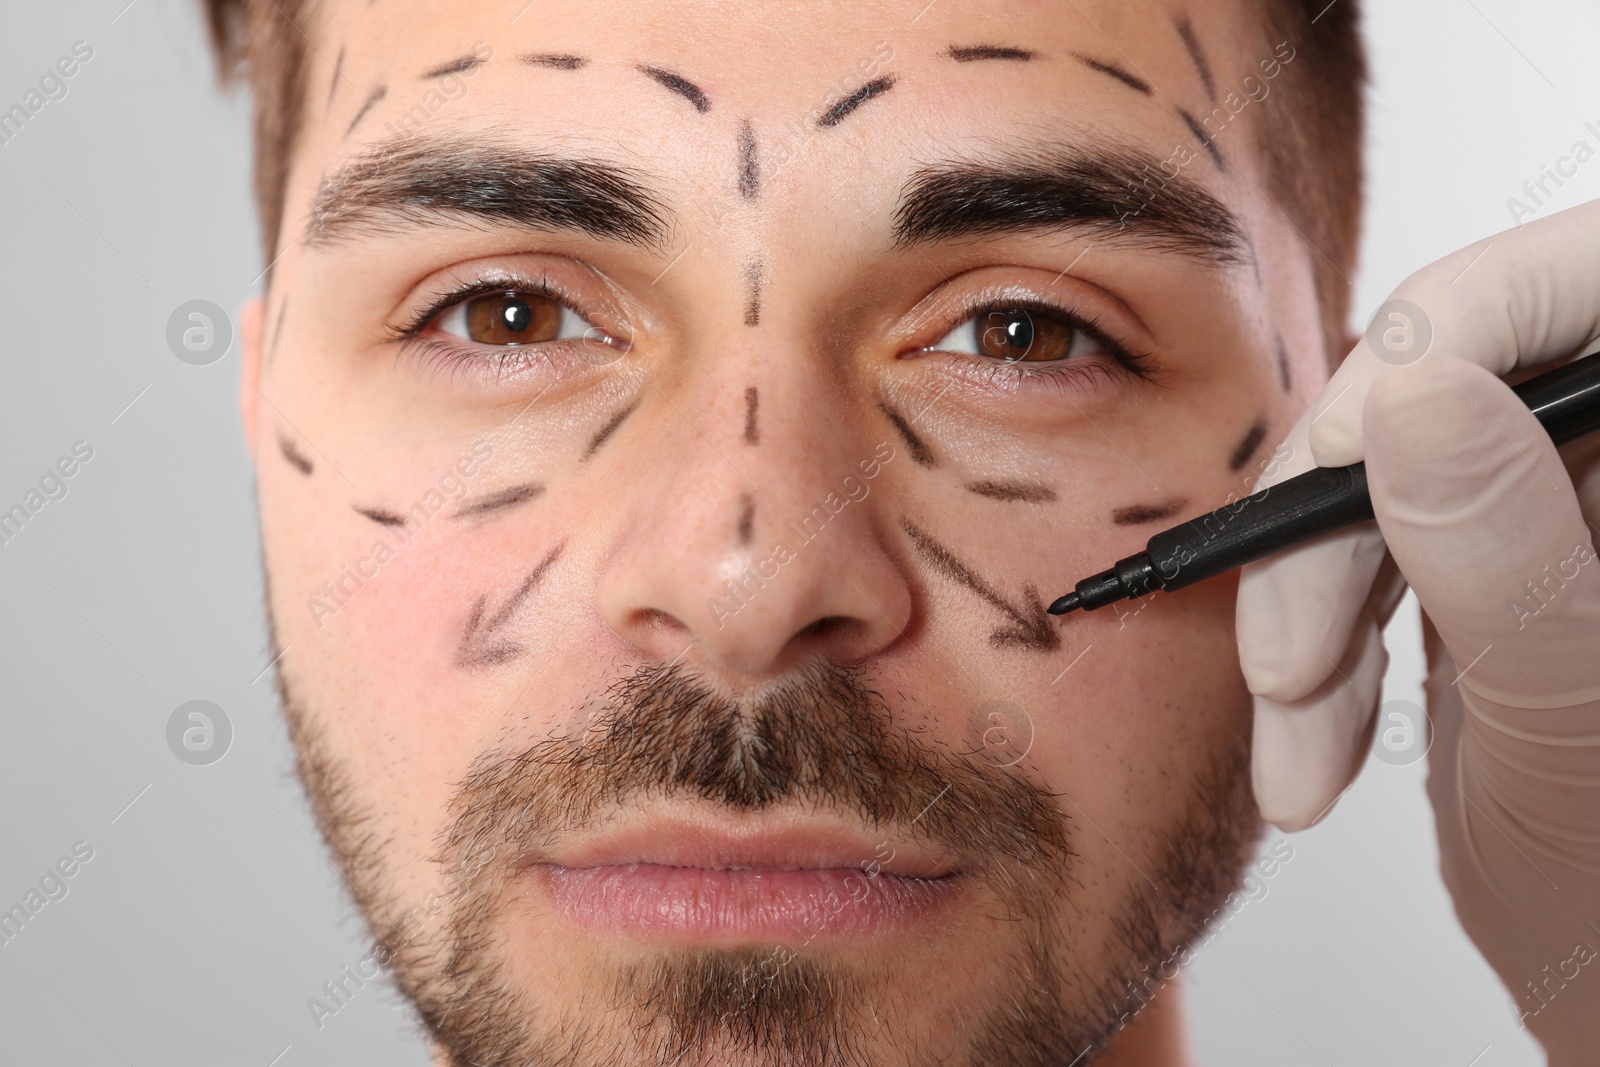 Photo of Doctor drawing marks on man's face for cosmetic surgery operation against grey background, closeup